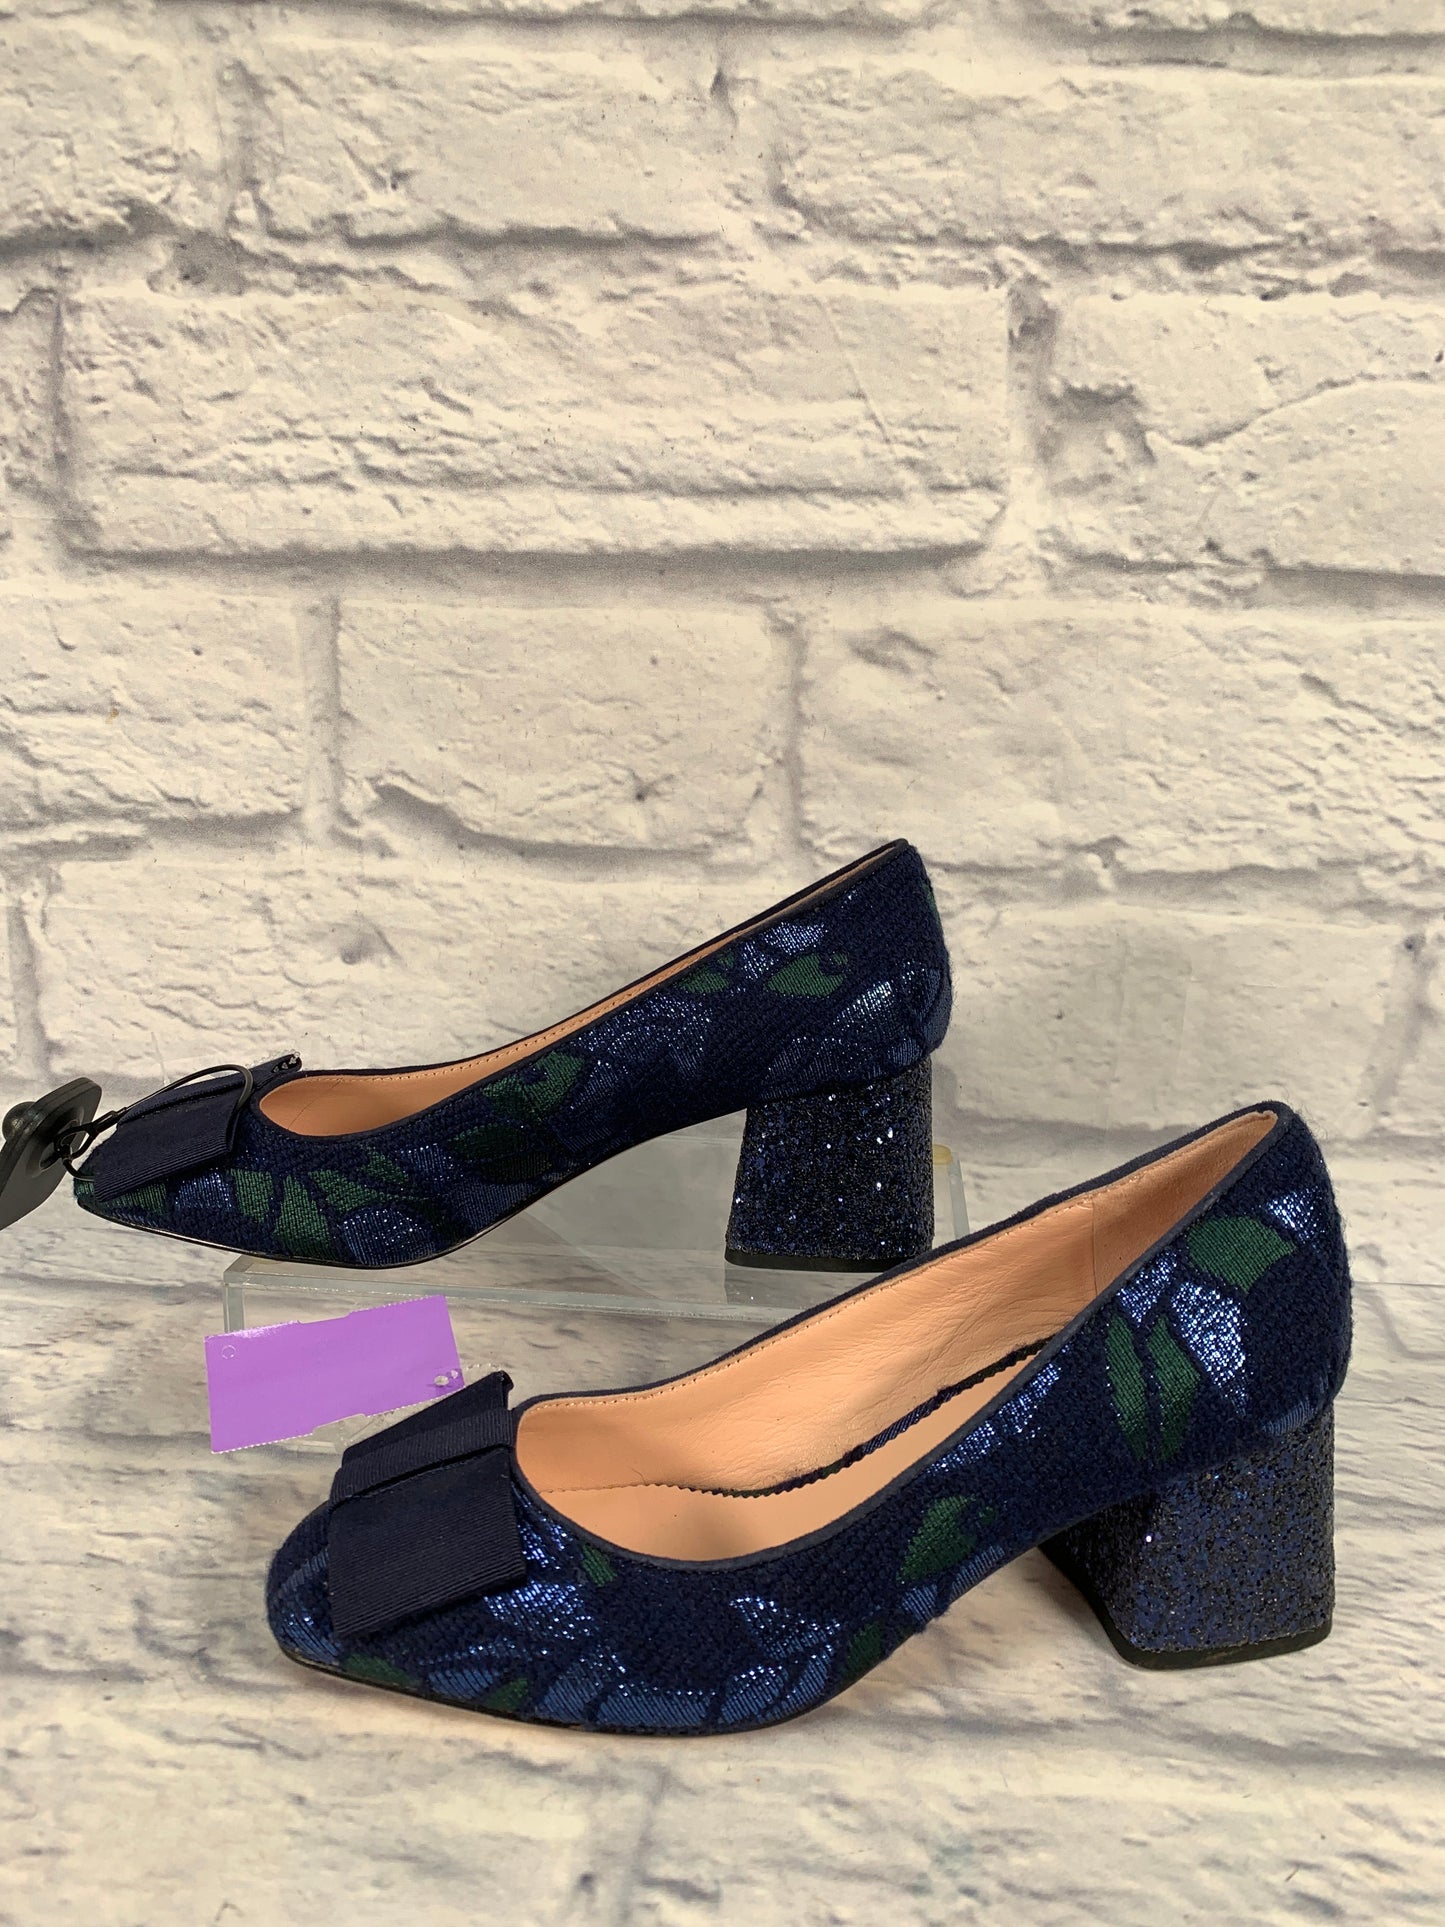 Shoes Heels Block By J. Crew  Size: 8